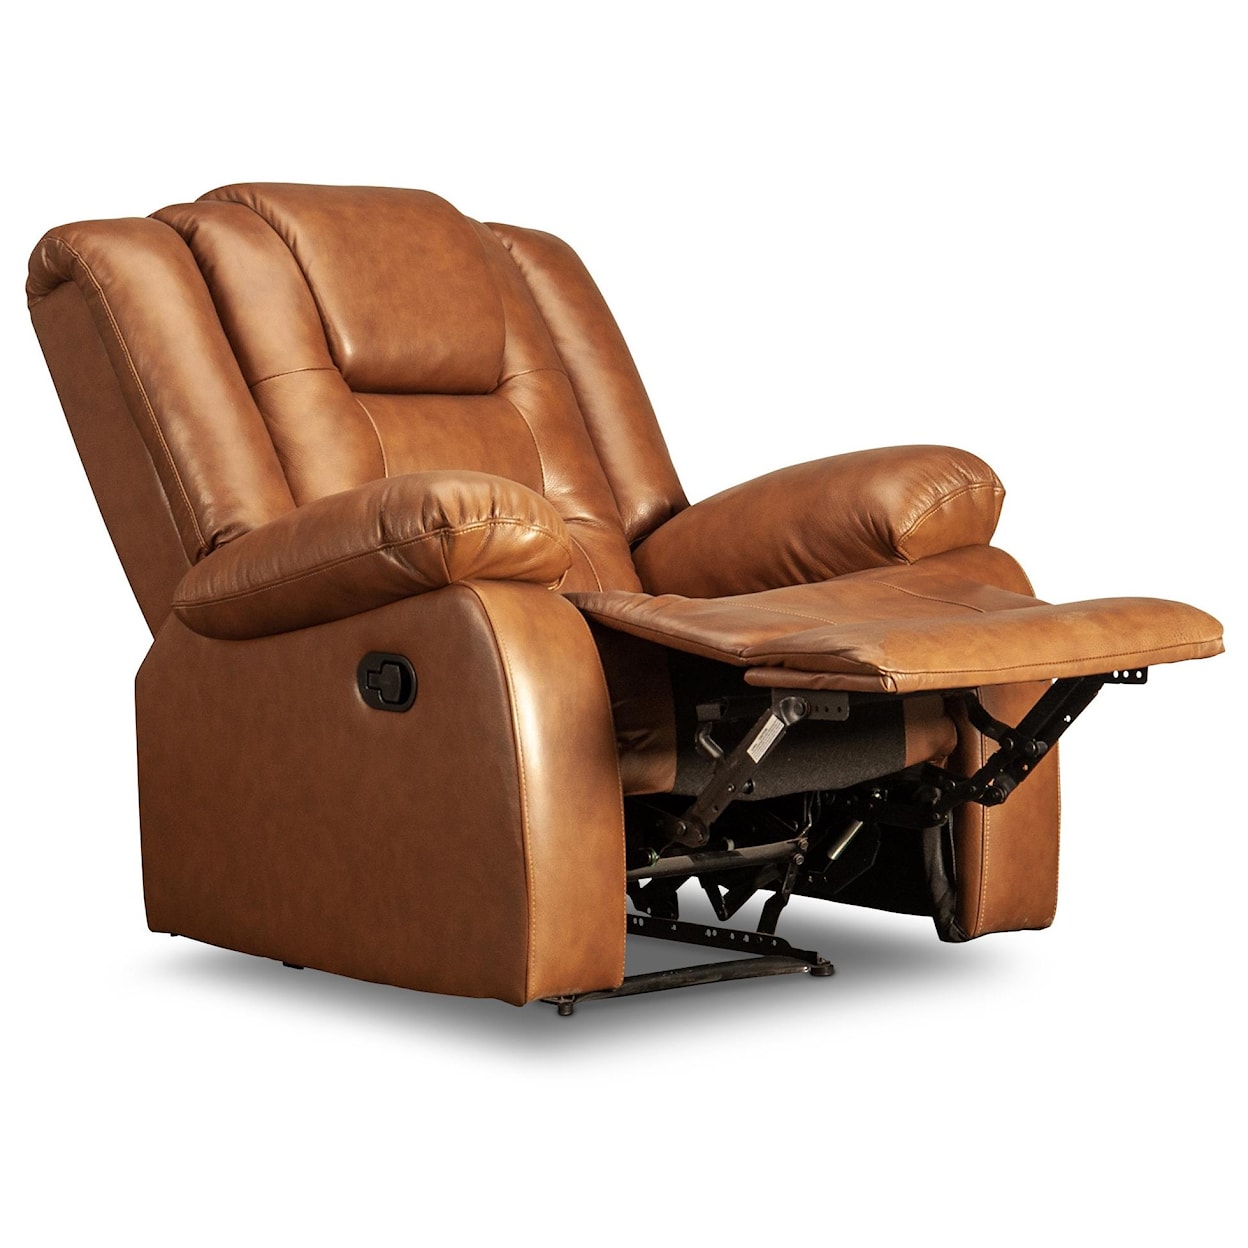 Vogue Home Furnishings Tully Tully Leather Match Recliner